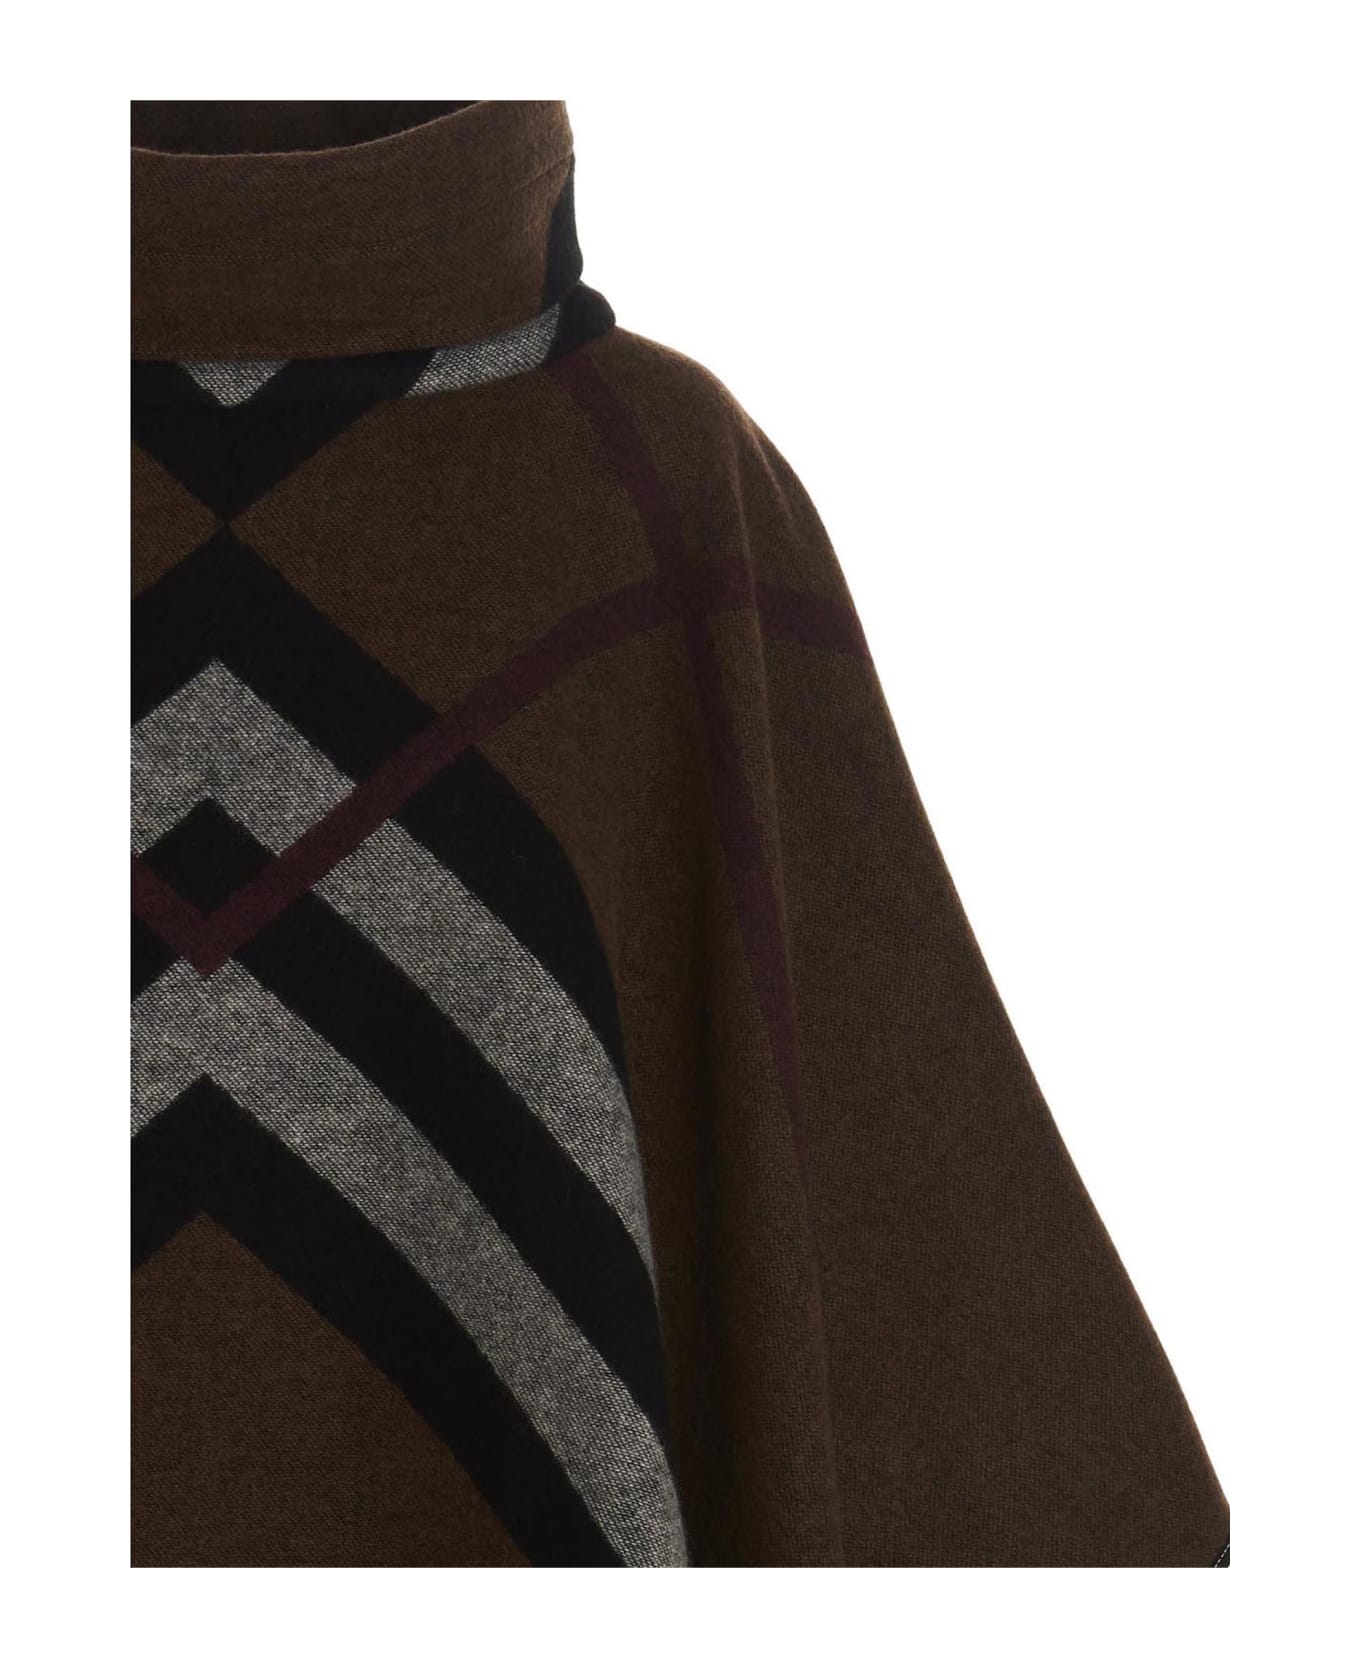 Burberry 'wootton' Poncho - Brown